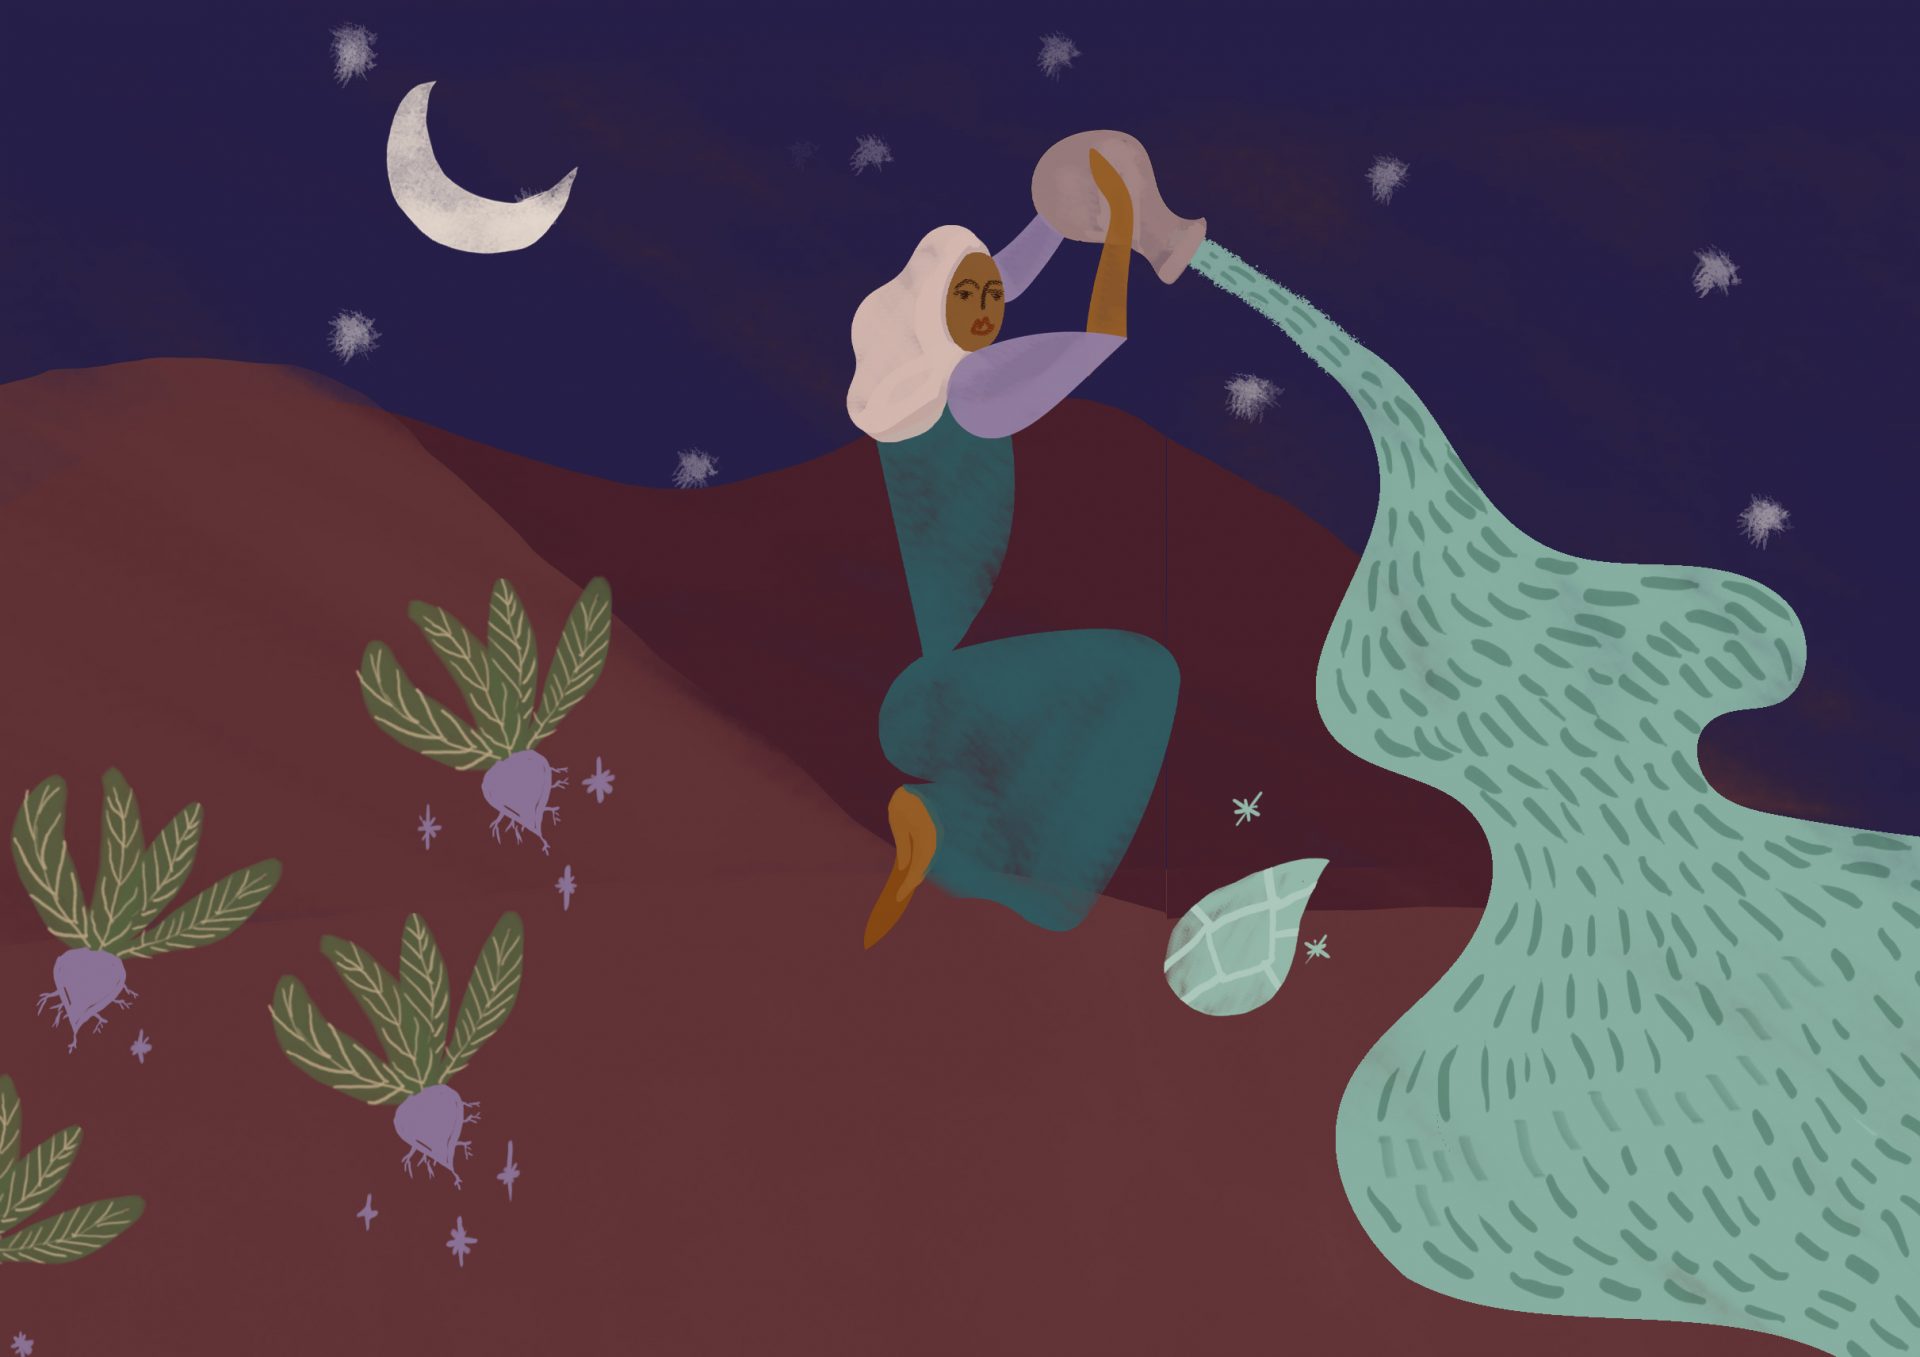 Illustration of woman pouring water from a cup against a half moon and starry night